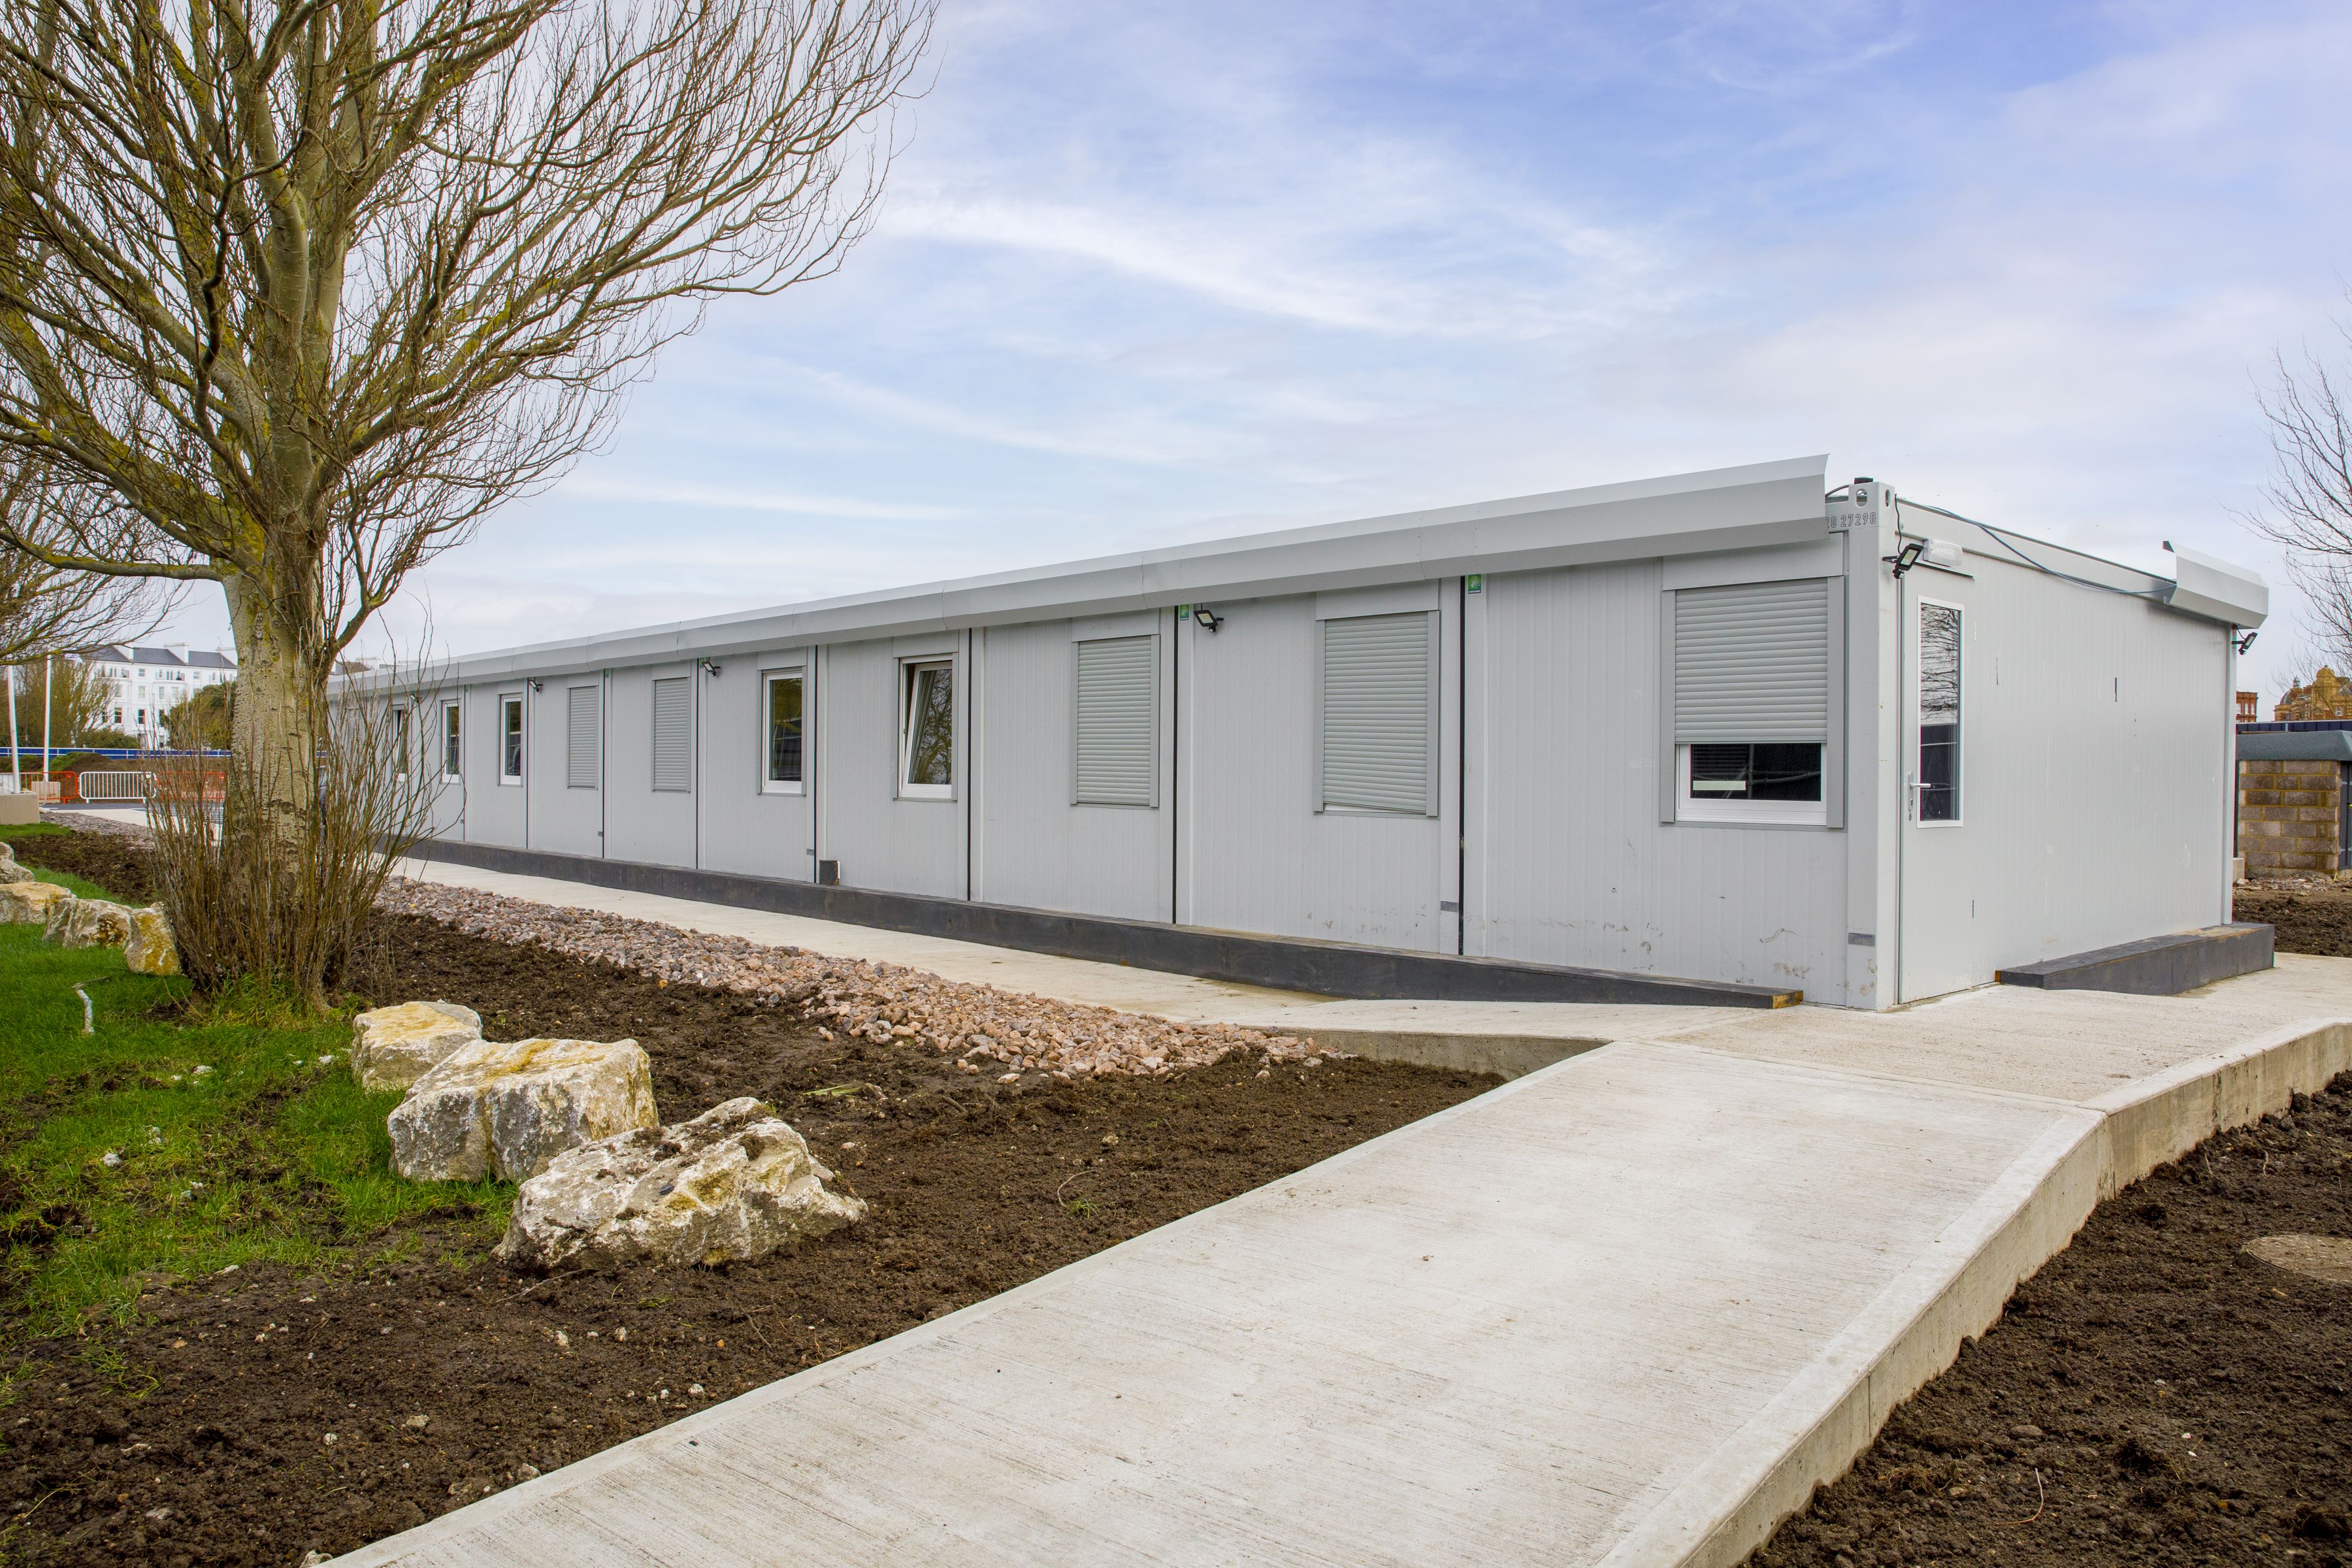 Modular building as accommodation with sanitary area for truck drivers, Belarus